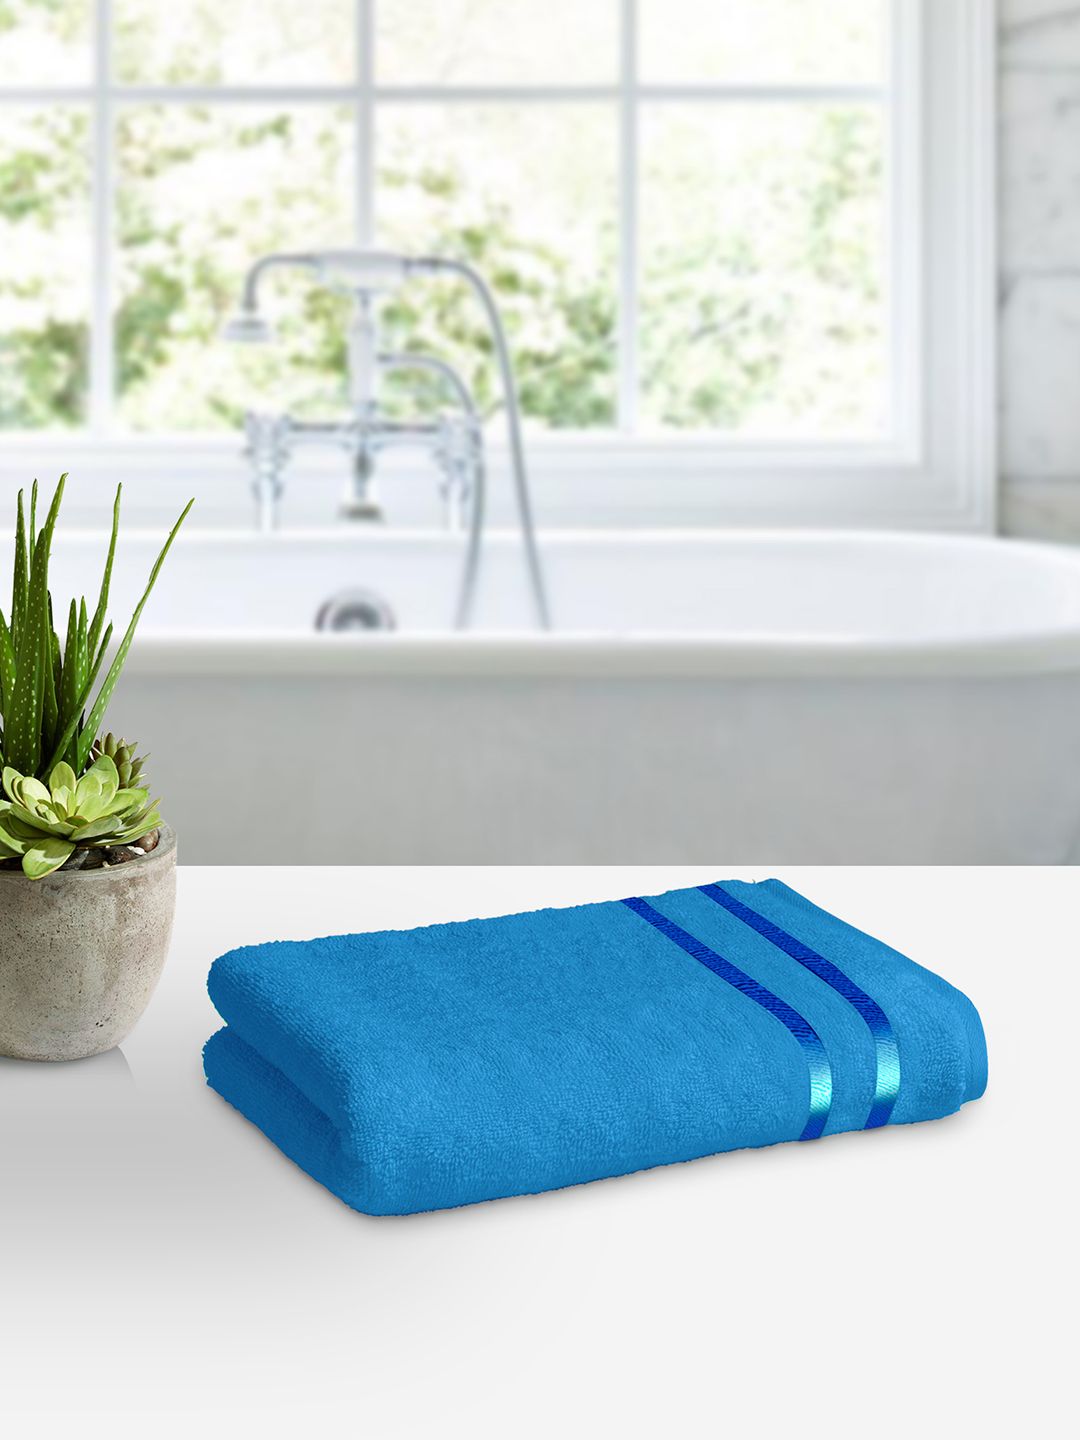 Story@home Blue Cotton 450 GSM Bath Towel Price in India